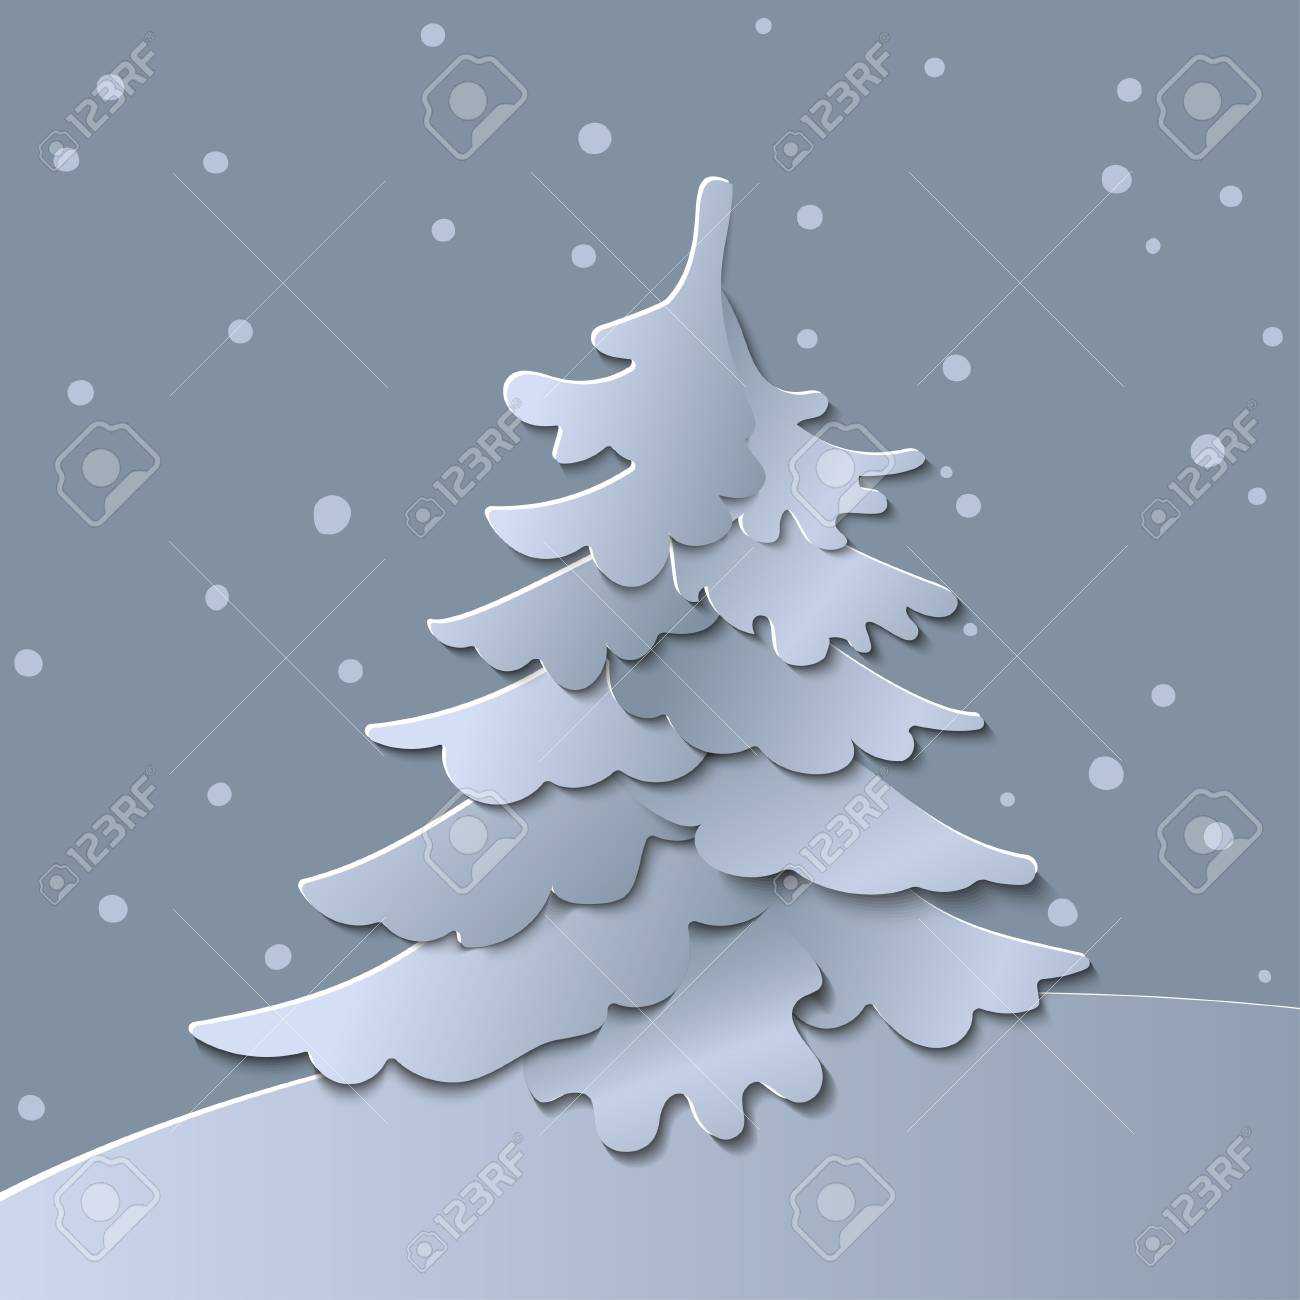 3D Abstract Paper Cut Illustration Of Christmas Tree. Vector.. Pertaining To 3D Christmas Tree Card Template